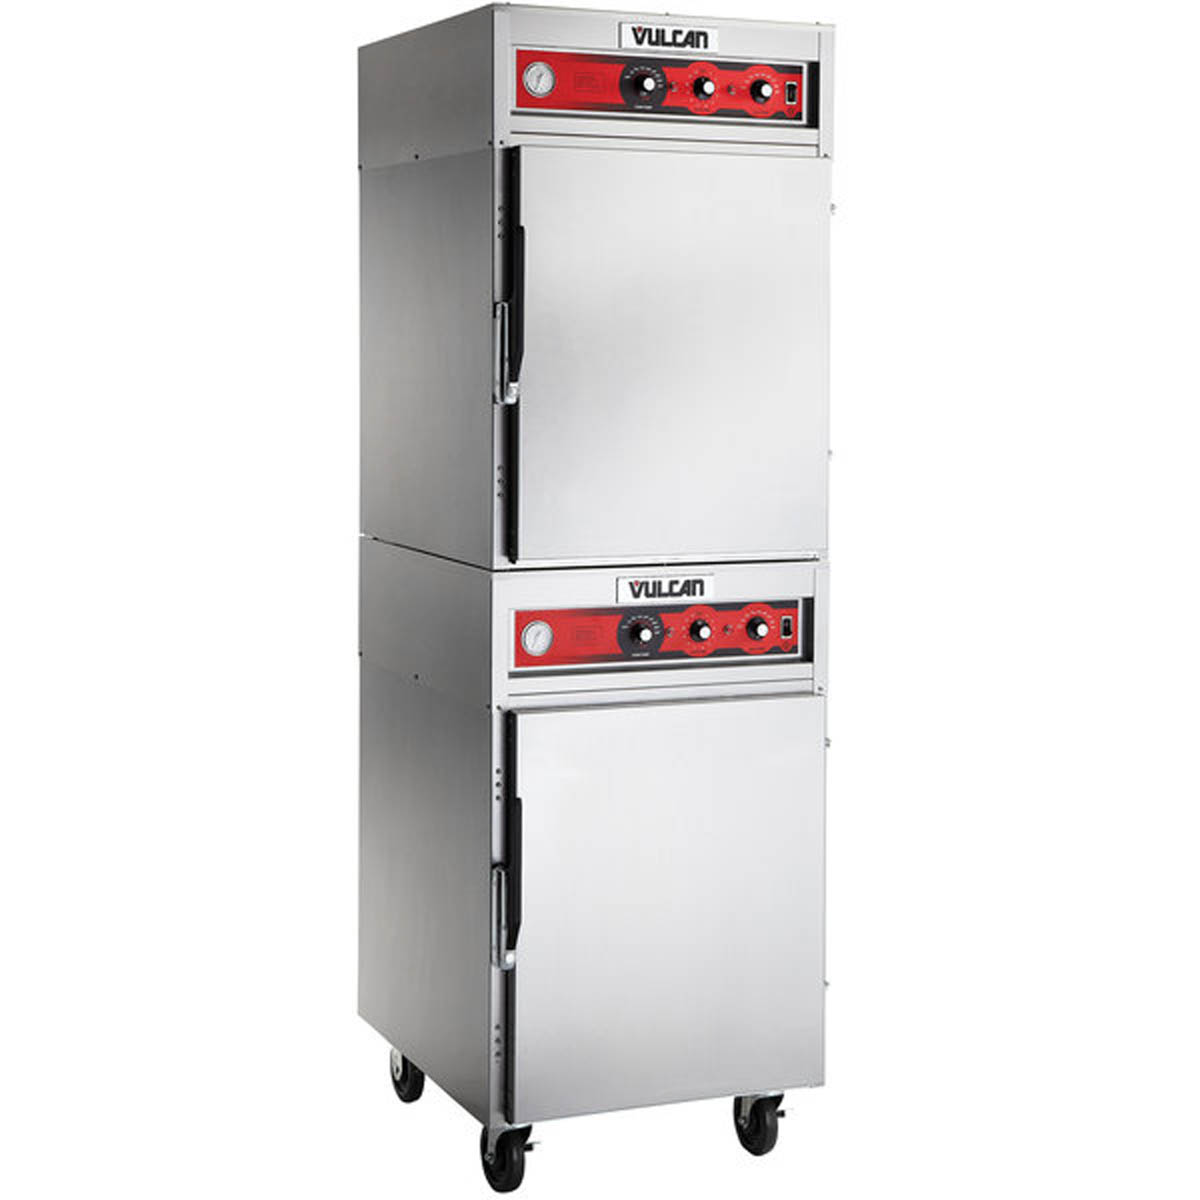 Vulcan VRH88 Mobile Cook / Hold Cabinet, Double-Deck, 6xWire Shelves, 16 Pan Capacity